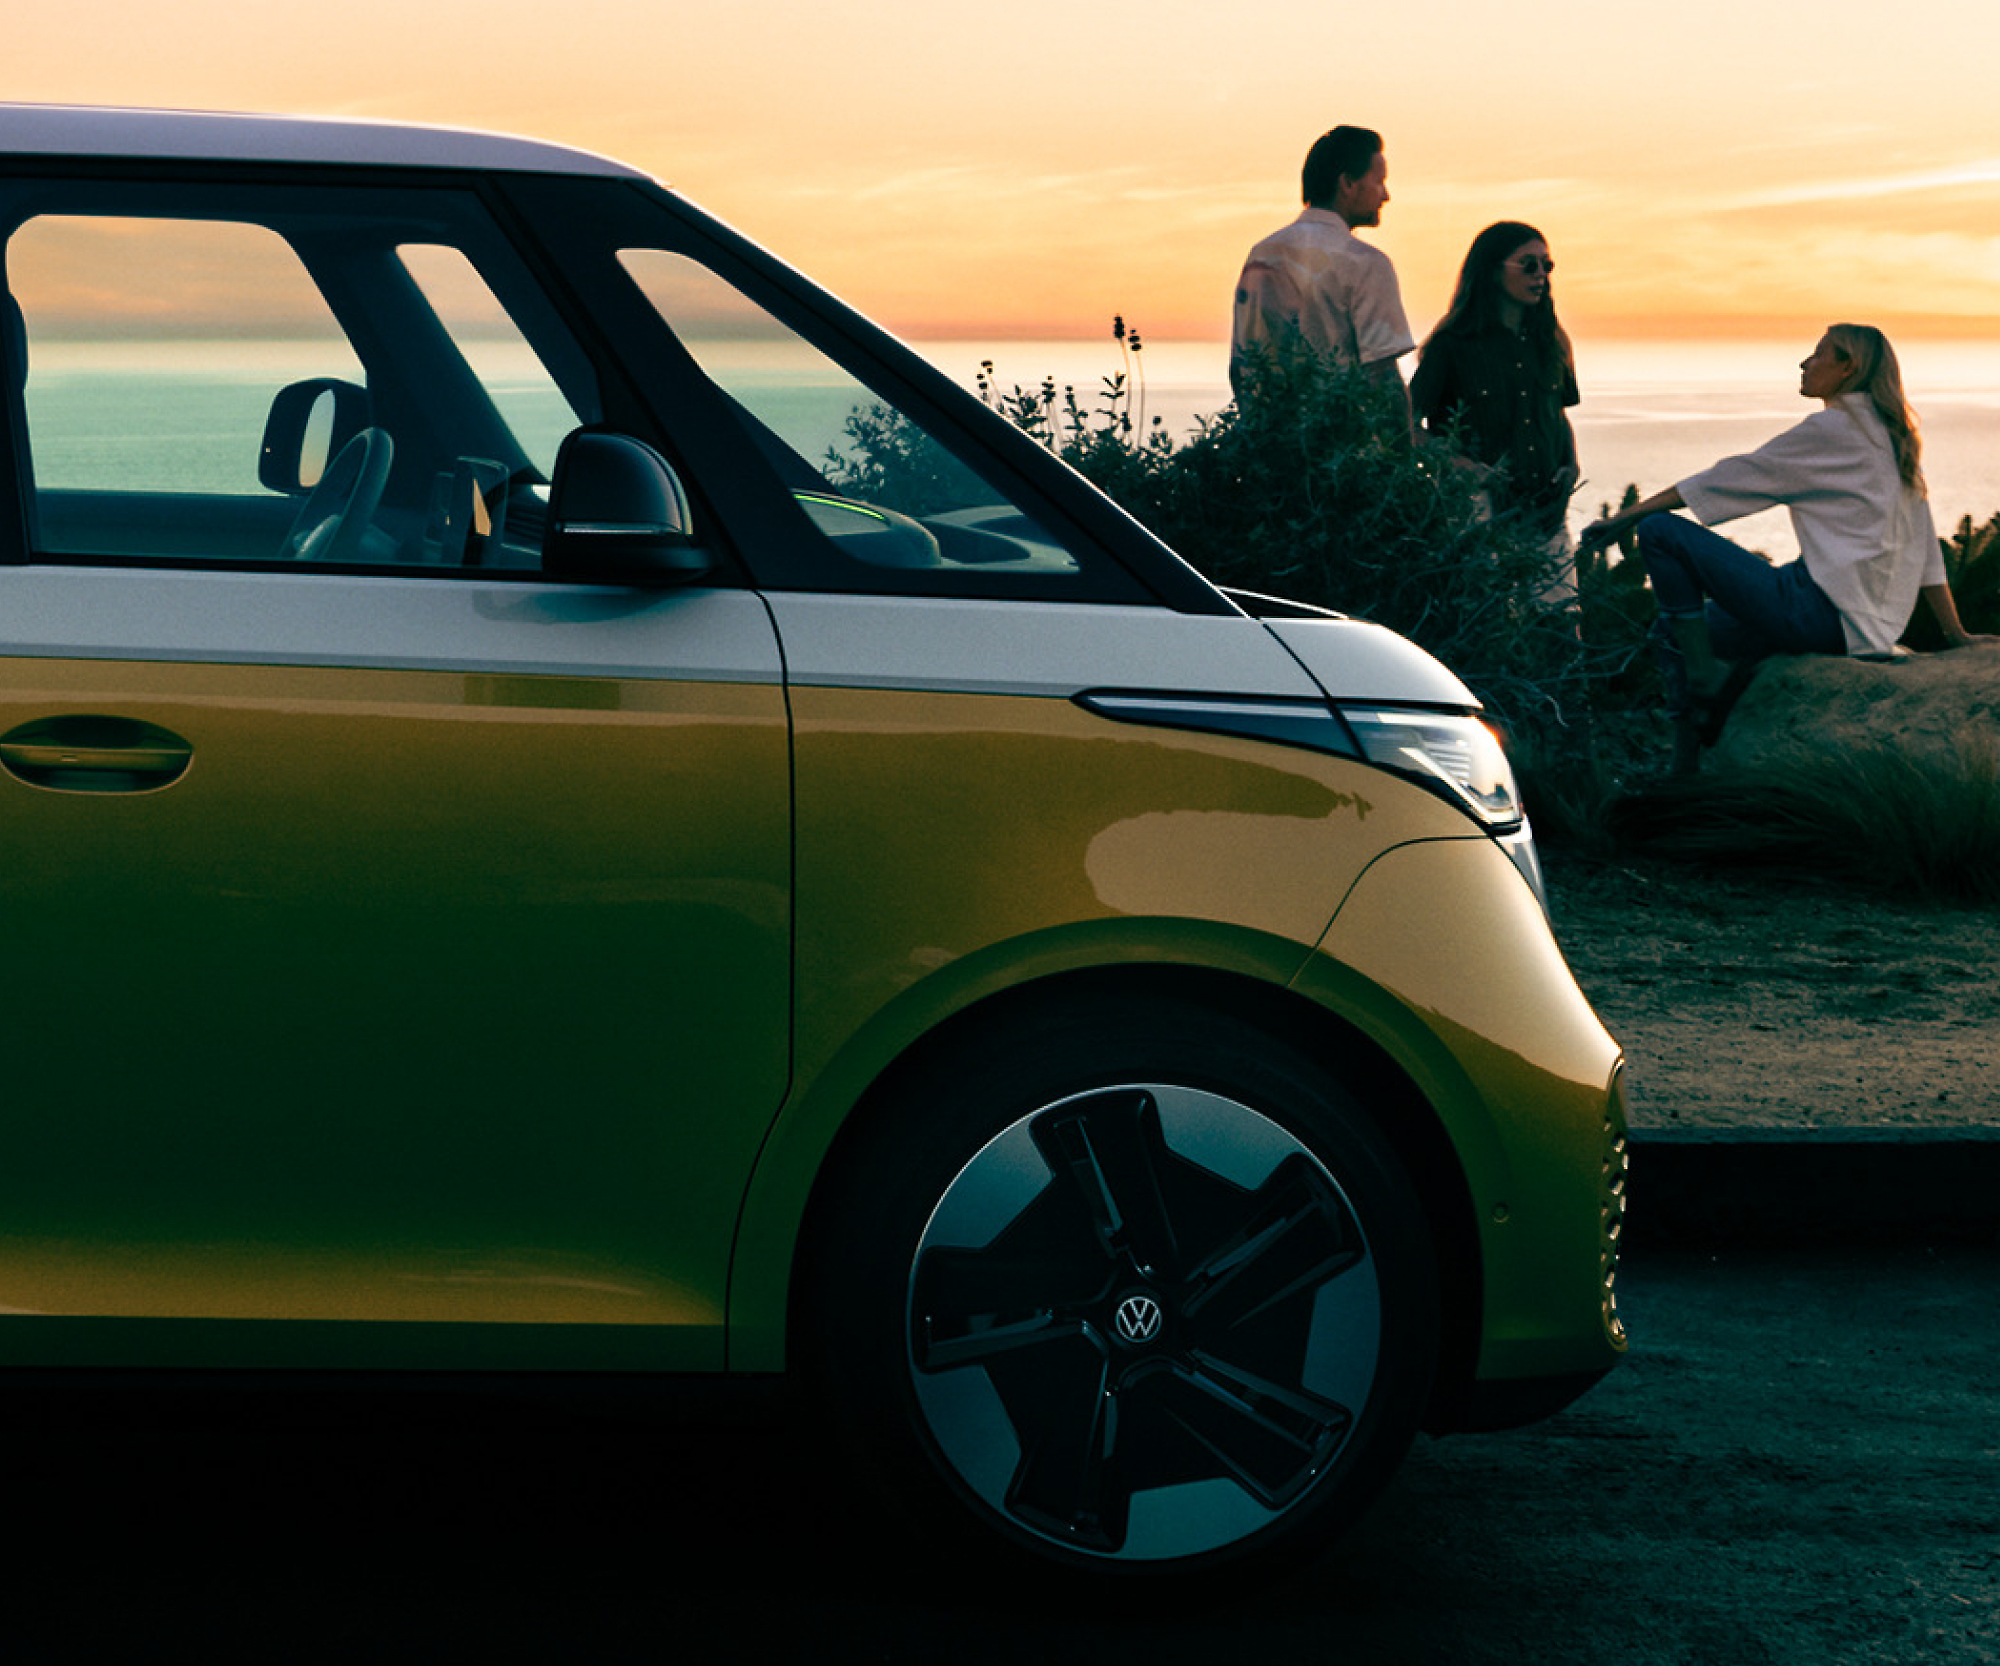 A yellow Volkswagen van parked on a coastal road at sunset with three people sitting and talking in the background.